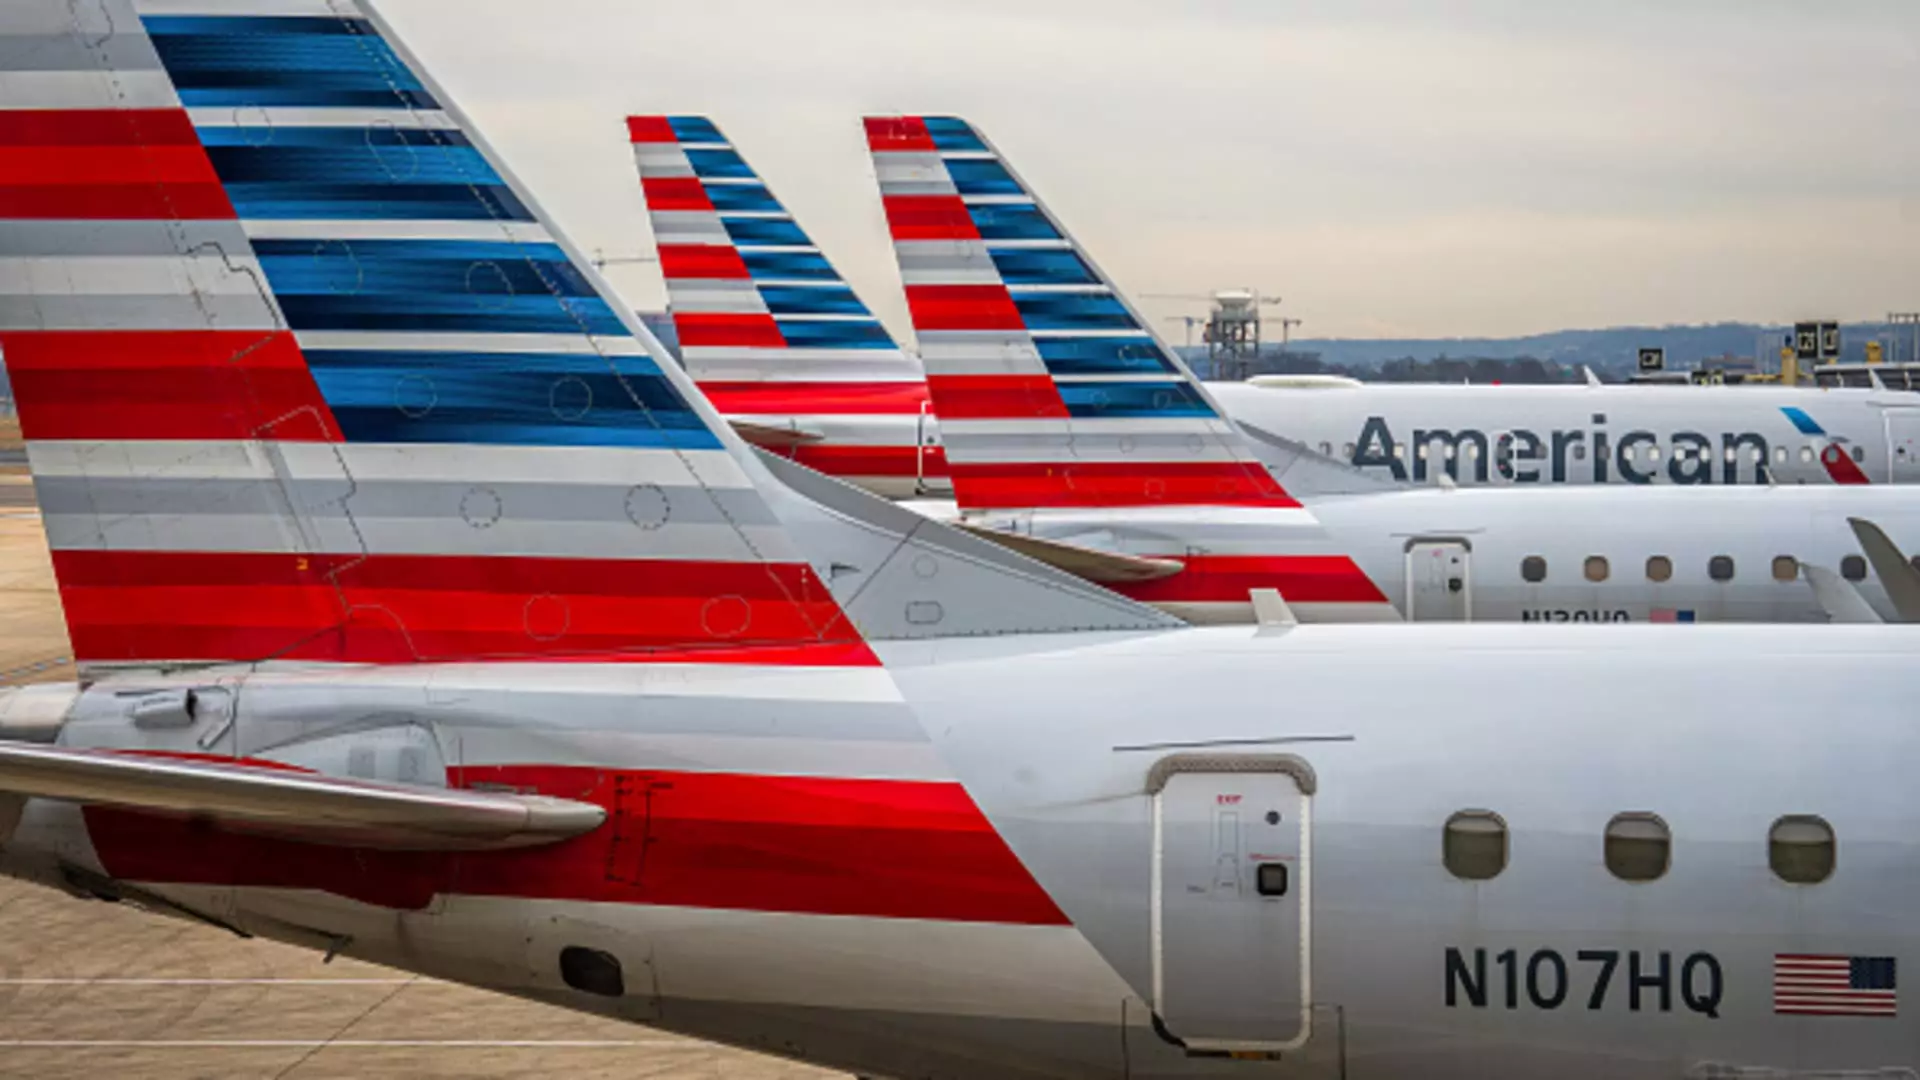 The Downfall of American Airlines: Sales Outlook Slashed and Chief Commercial Officer Let Go